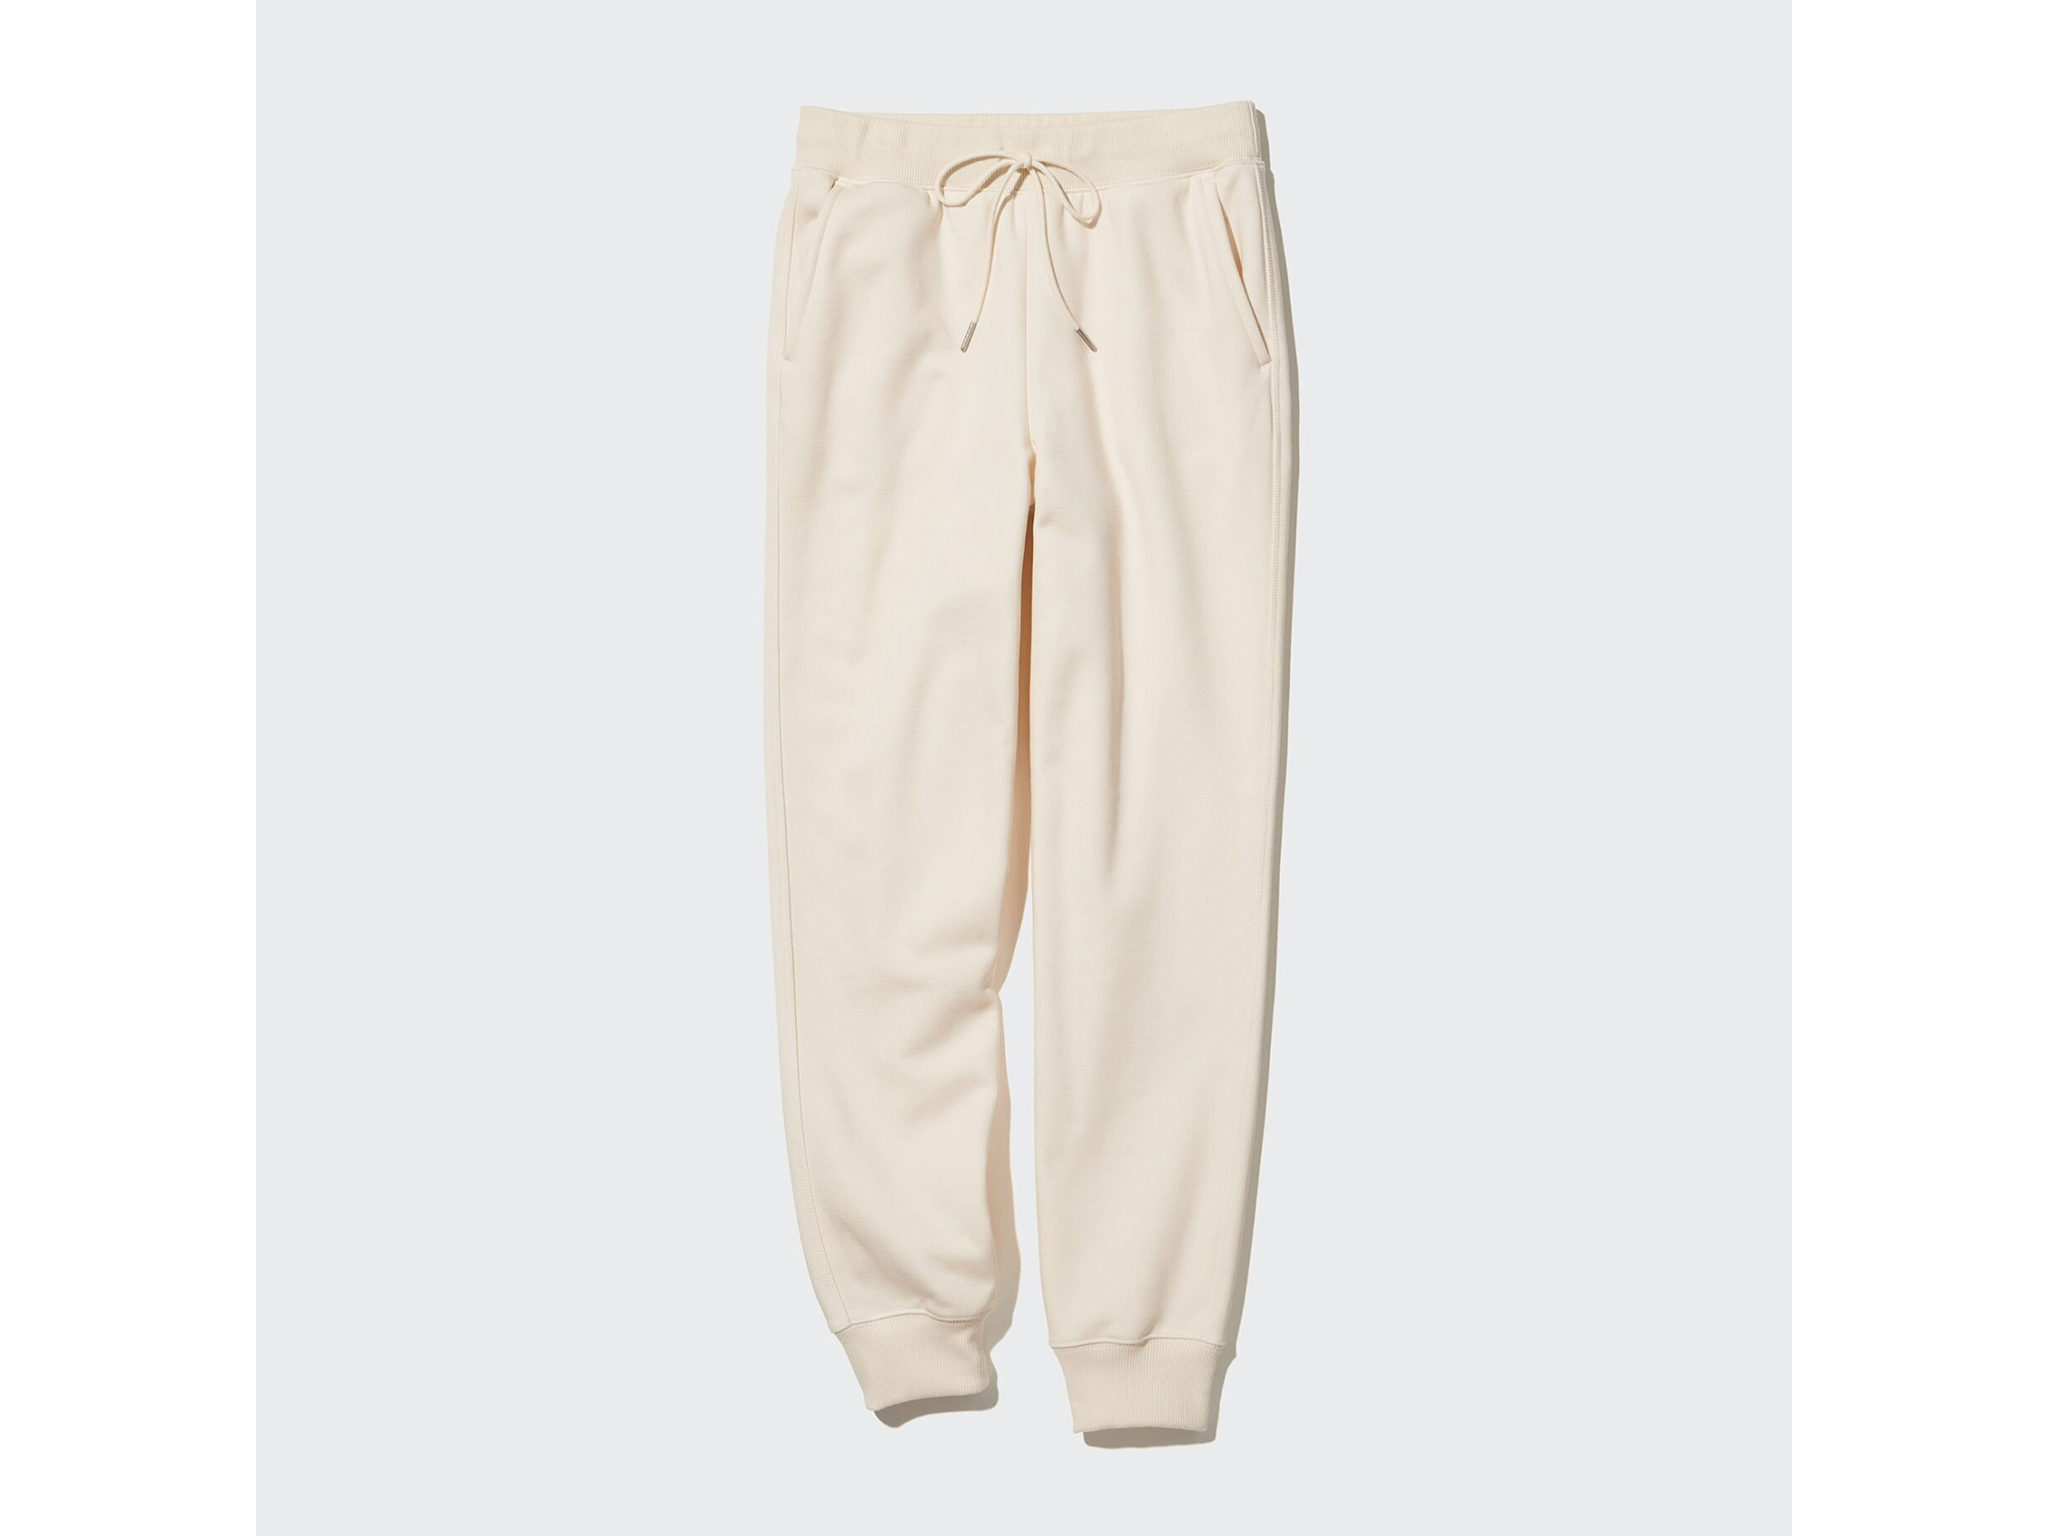 Uniqlo Heattech pile lined joggers 